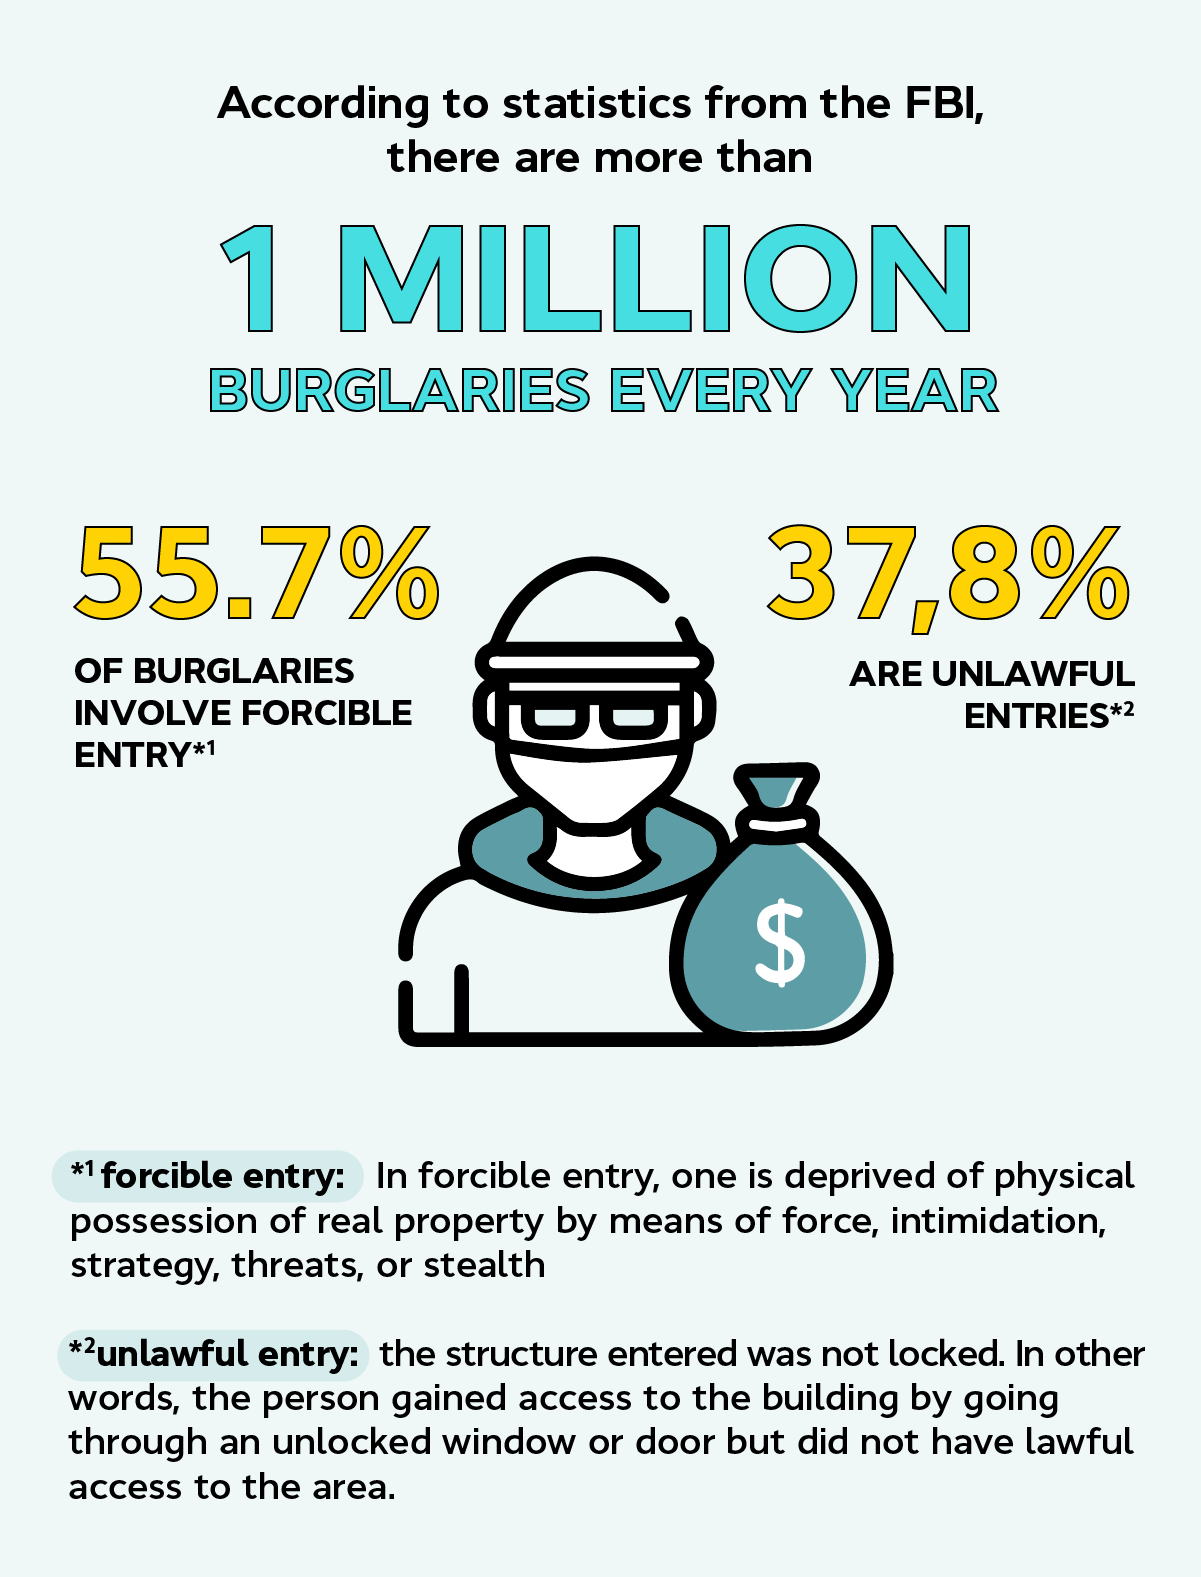 According to the FBI, There are 1 Million Burglaries Each Year (w/ stats)